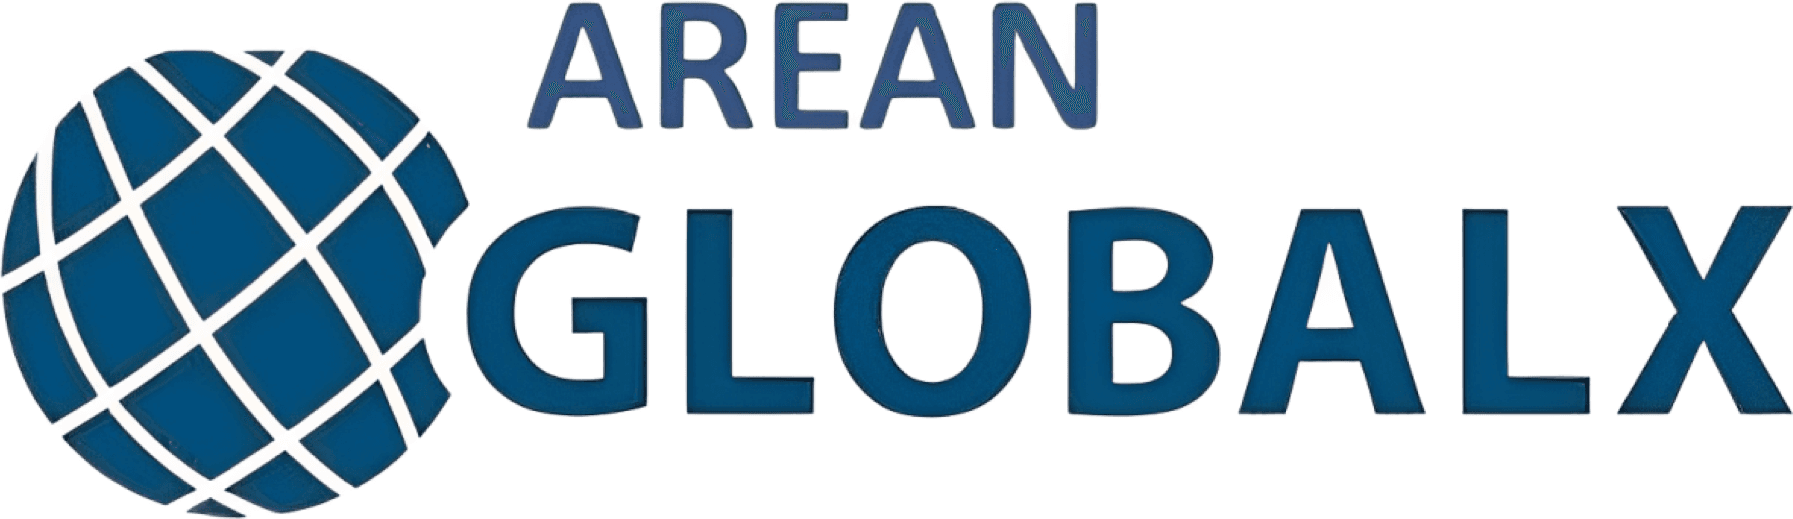 Arean Global X